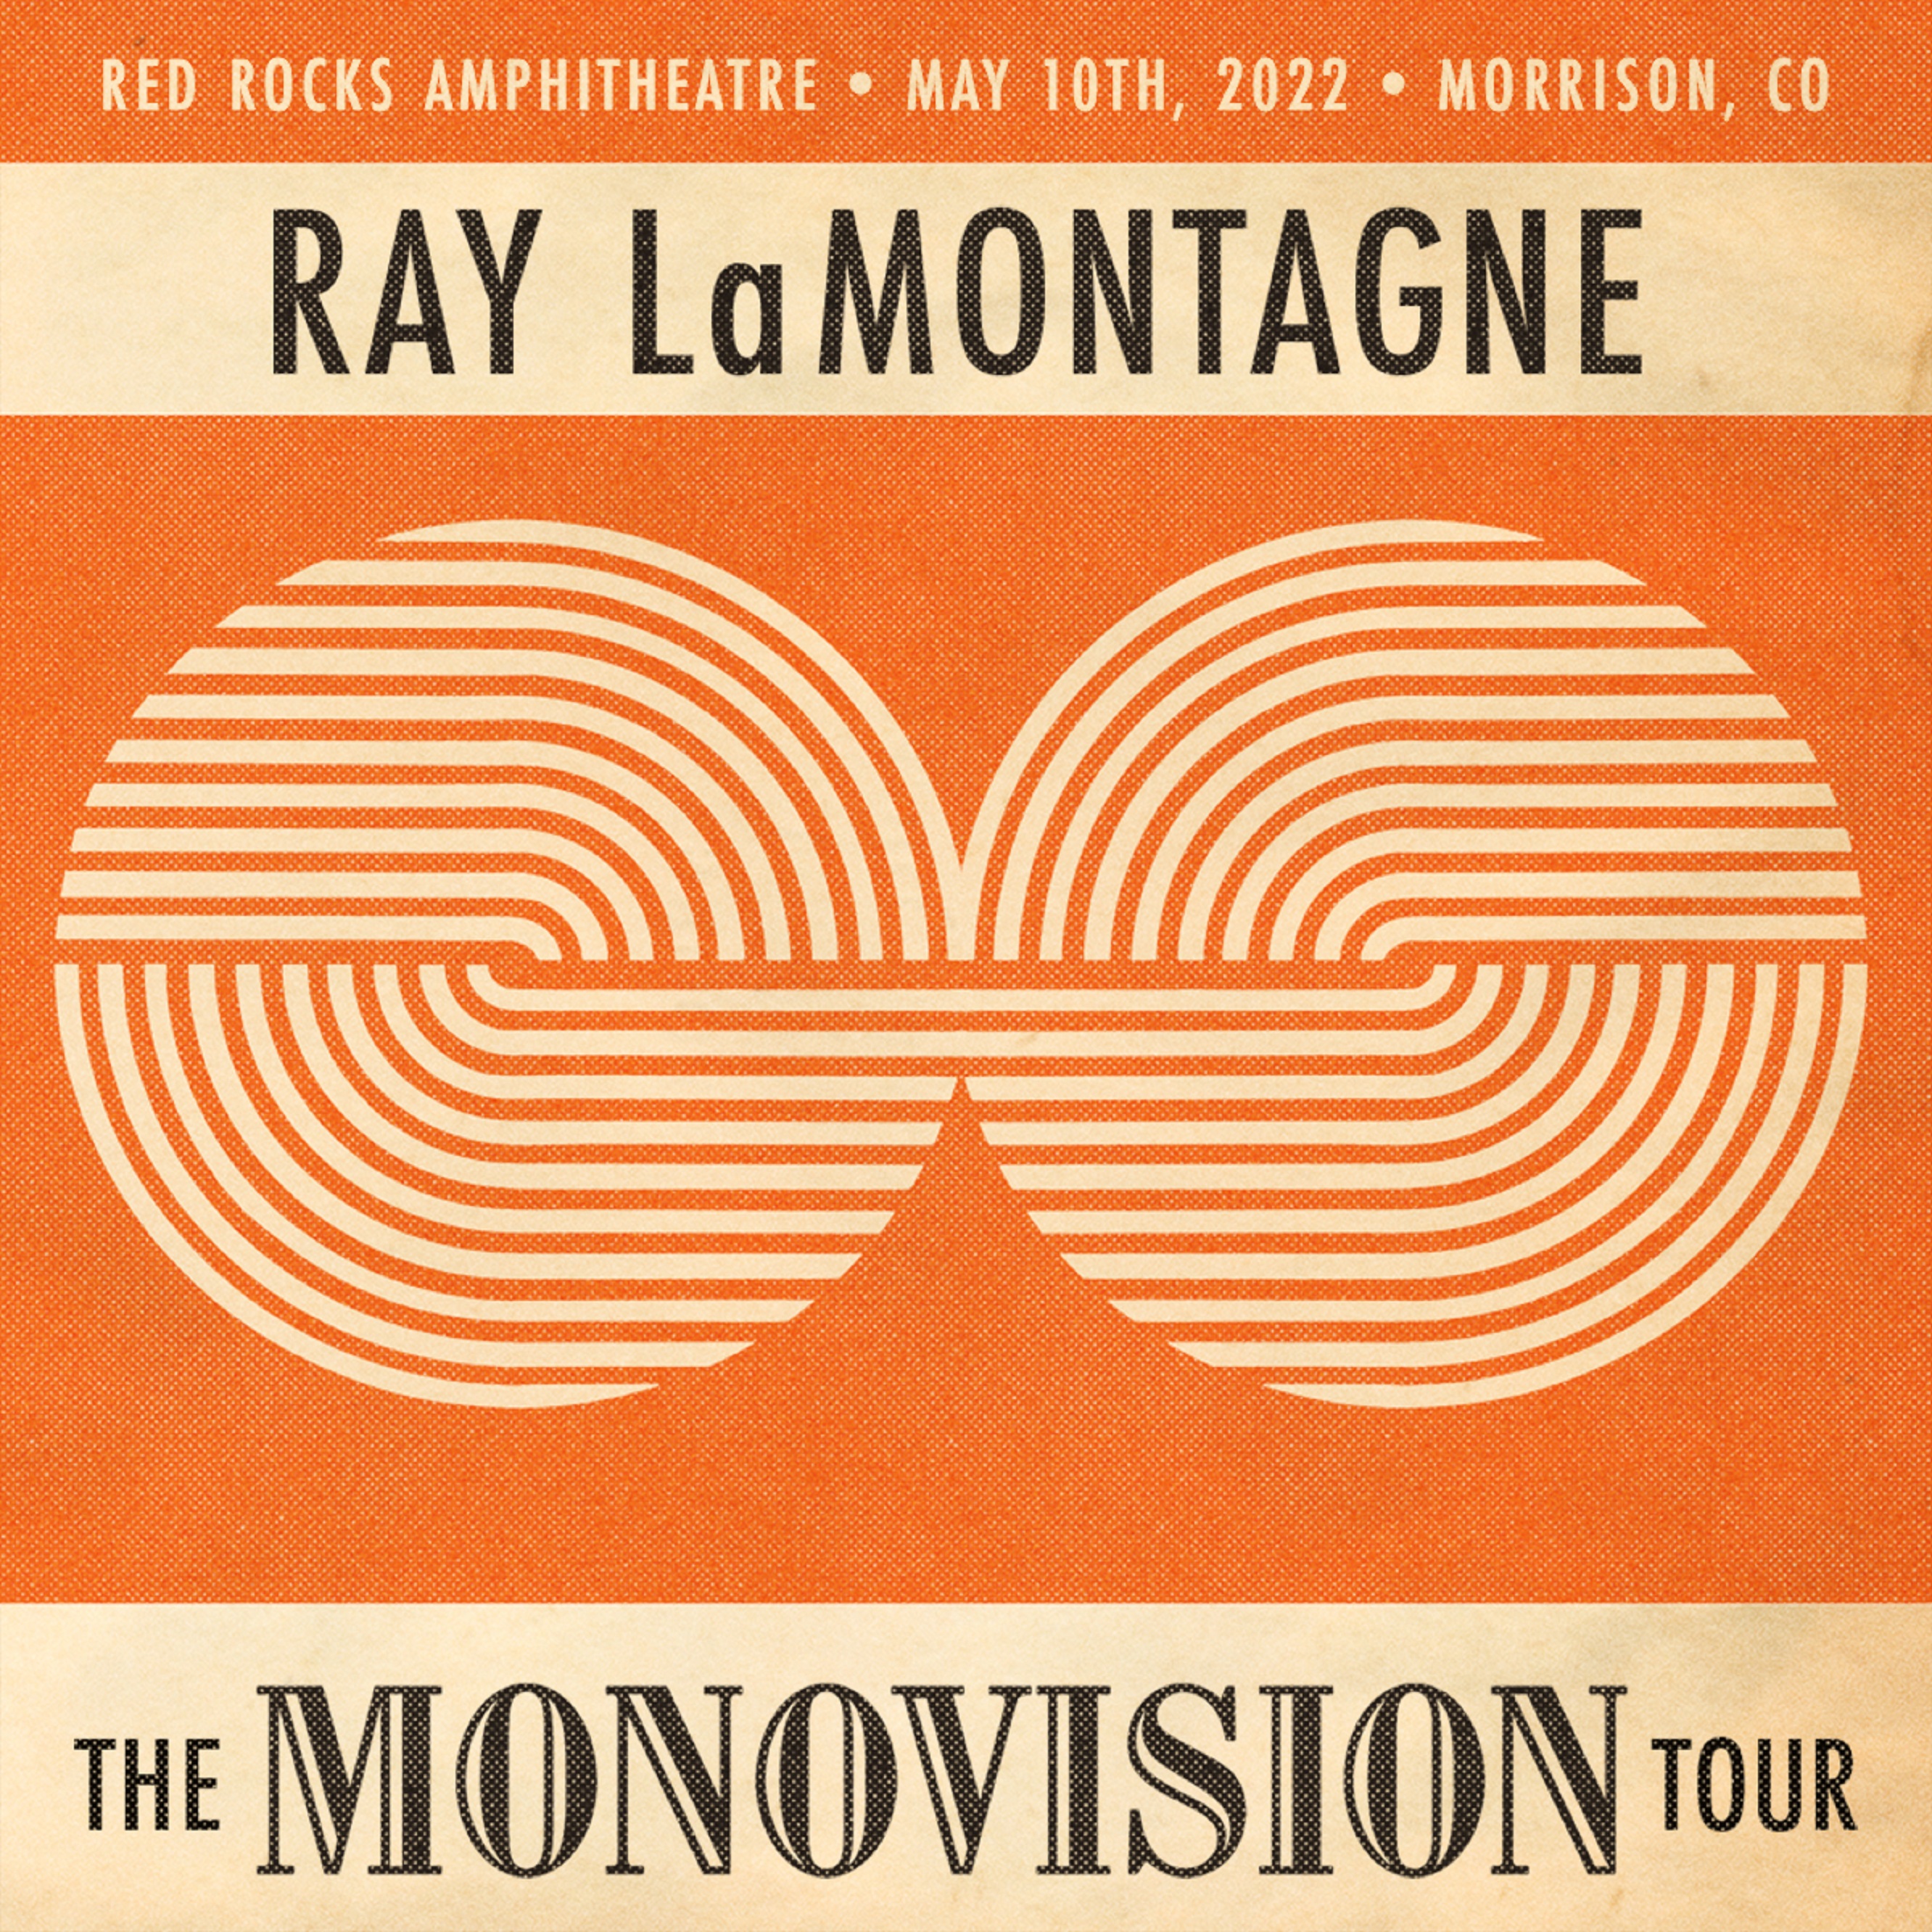 Ray LaMontagne to play Red Rocks Amphitheatre May 10th, 2022